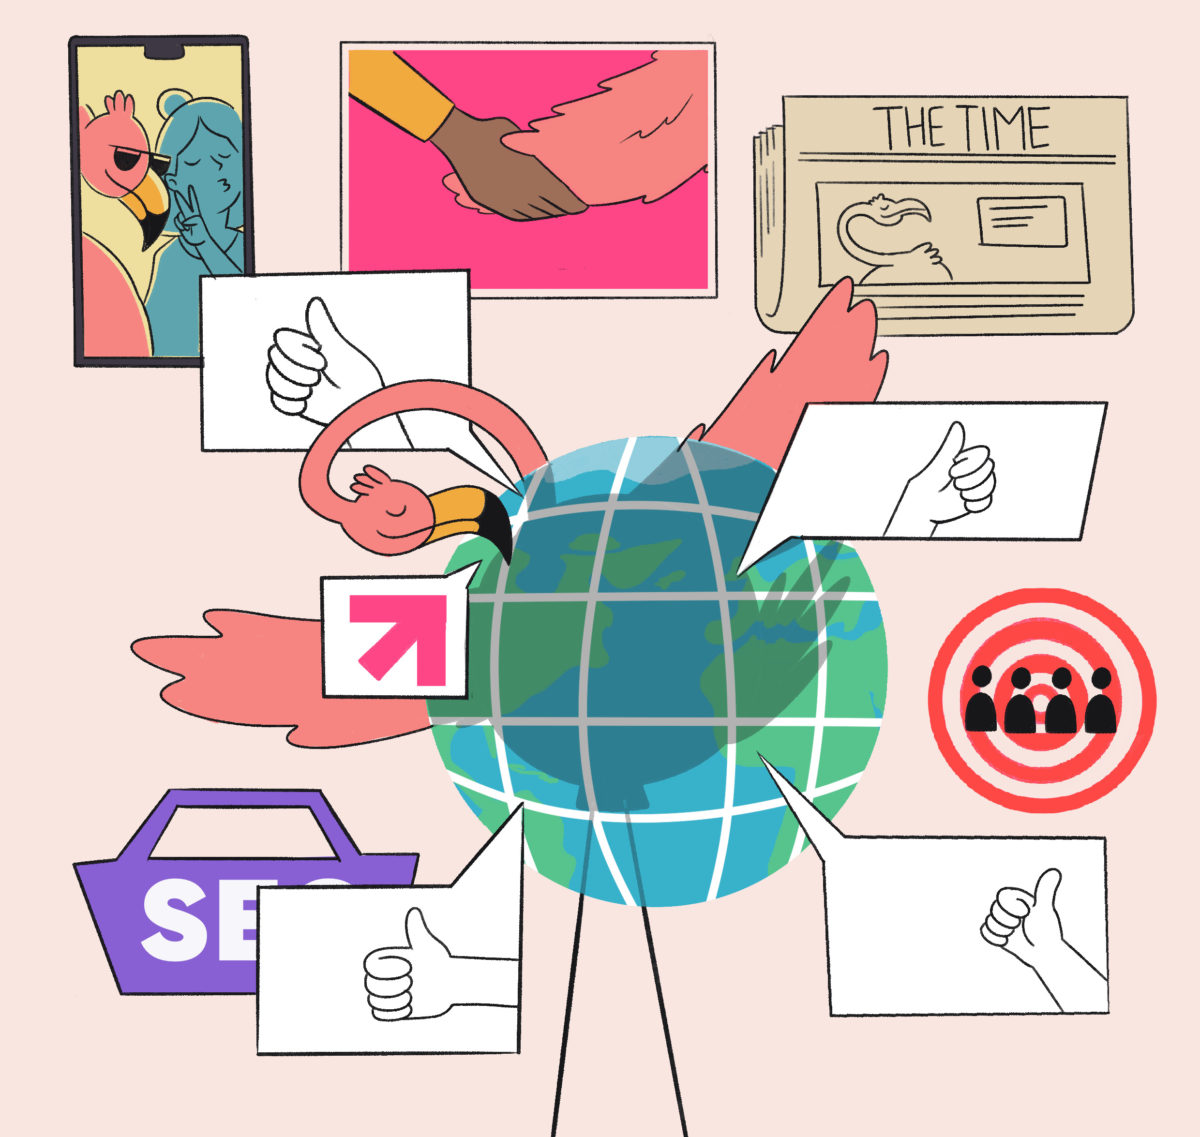 An illustrated representation of various social activities and media surrounding a stylized globe, symbolizing global communication and interaction.